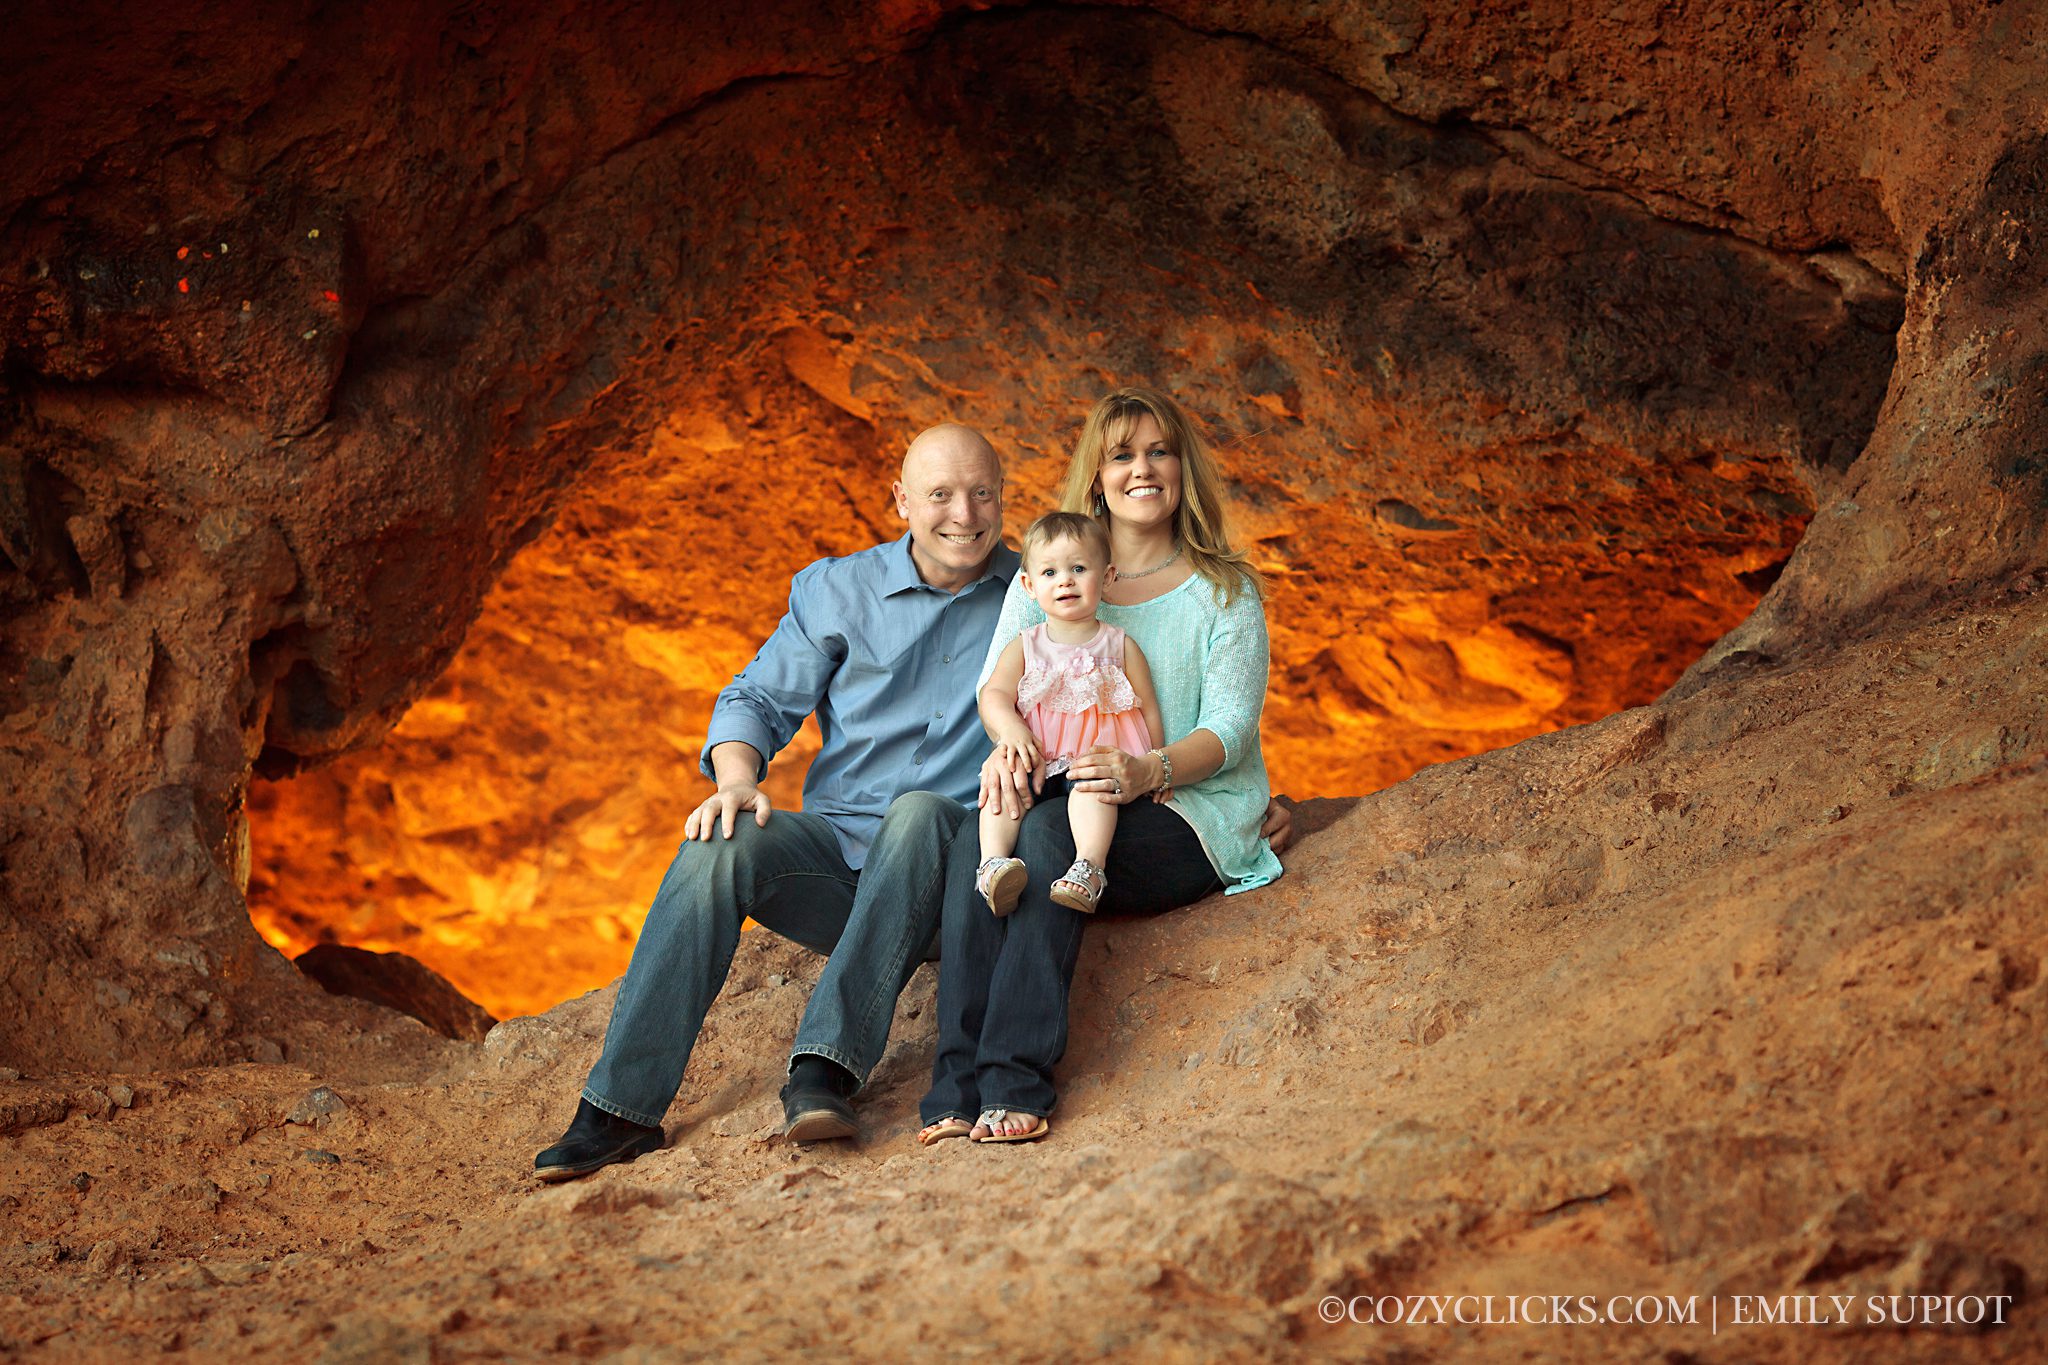 Family photo with mom, dad and 18 month old girl at the Hole in papago park